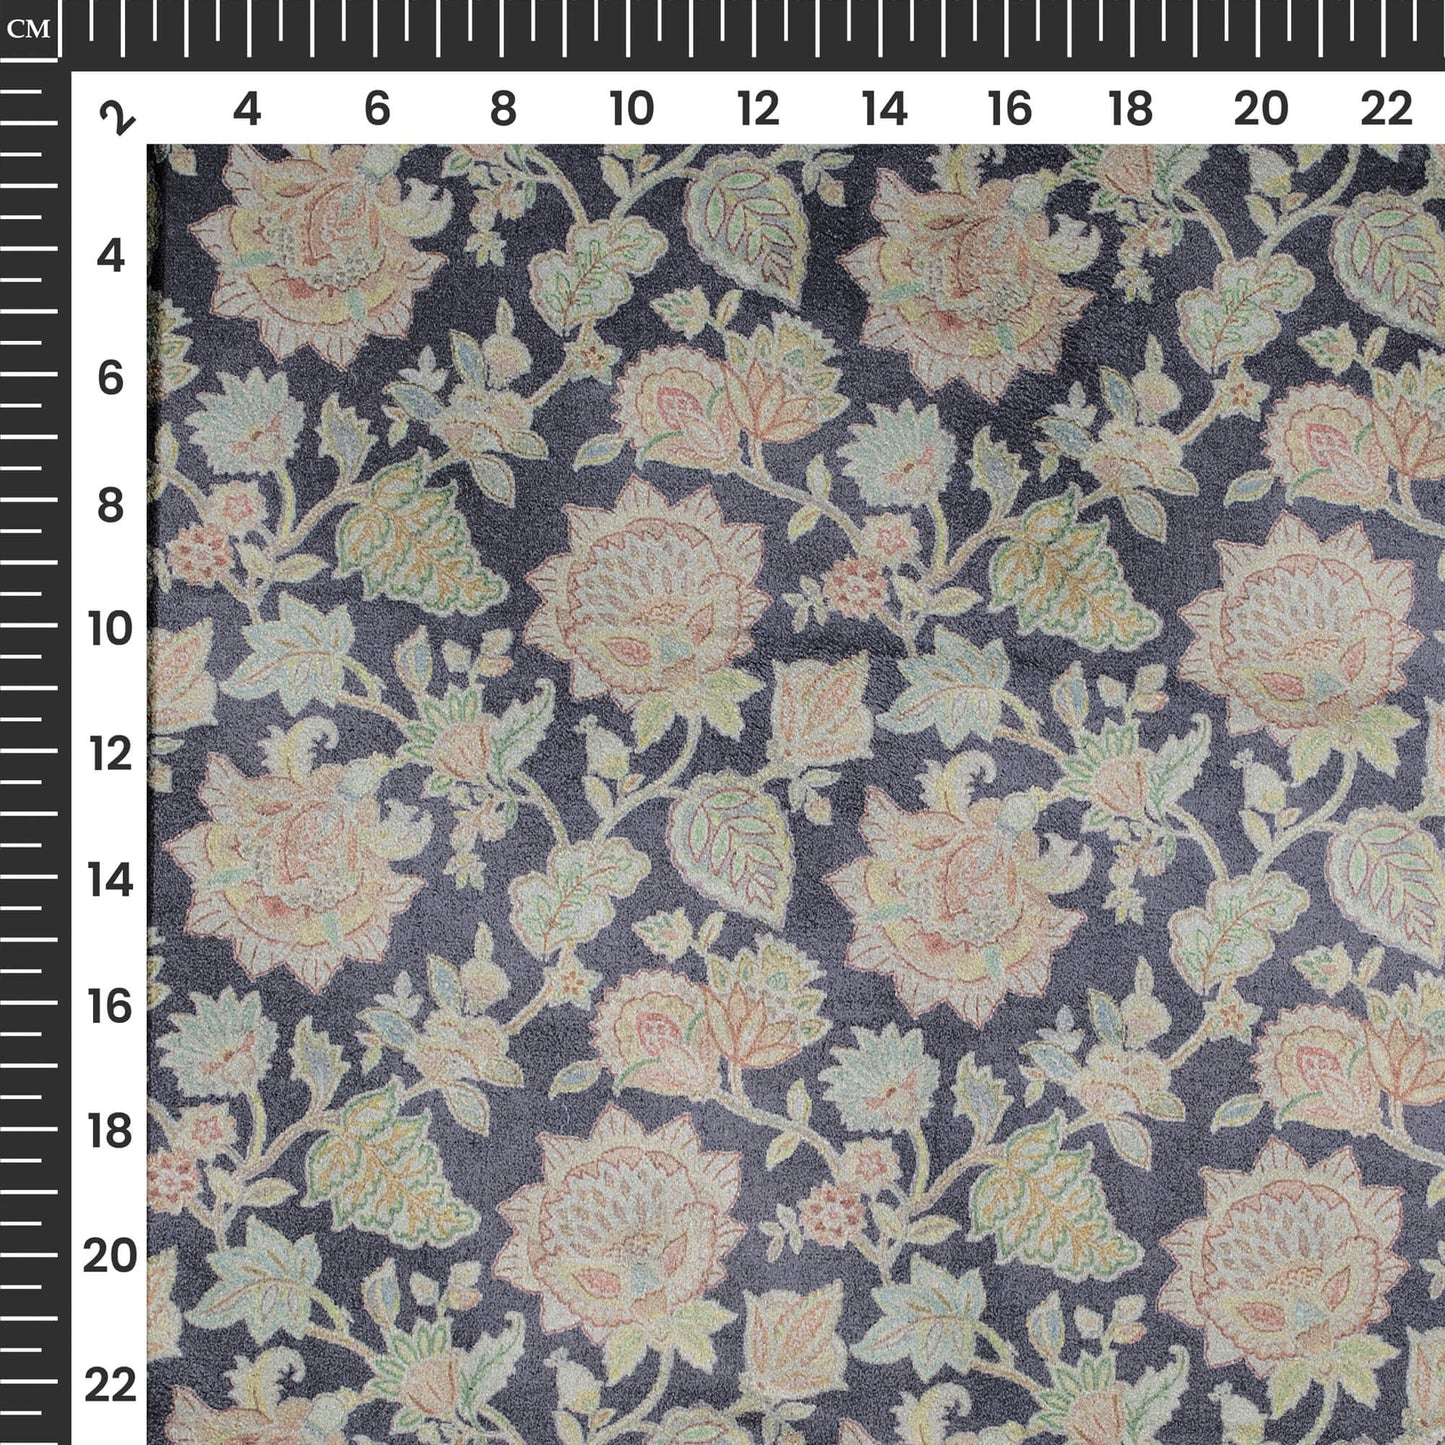 Ethnic Floral Printed Deluxe Suede Fabric